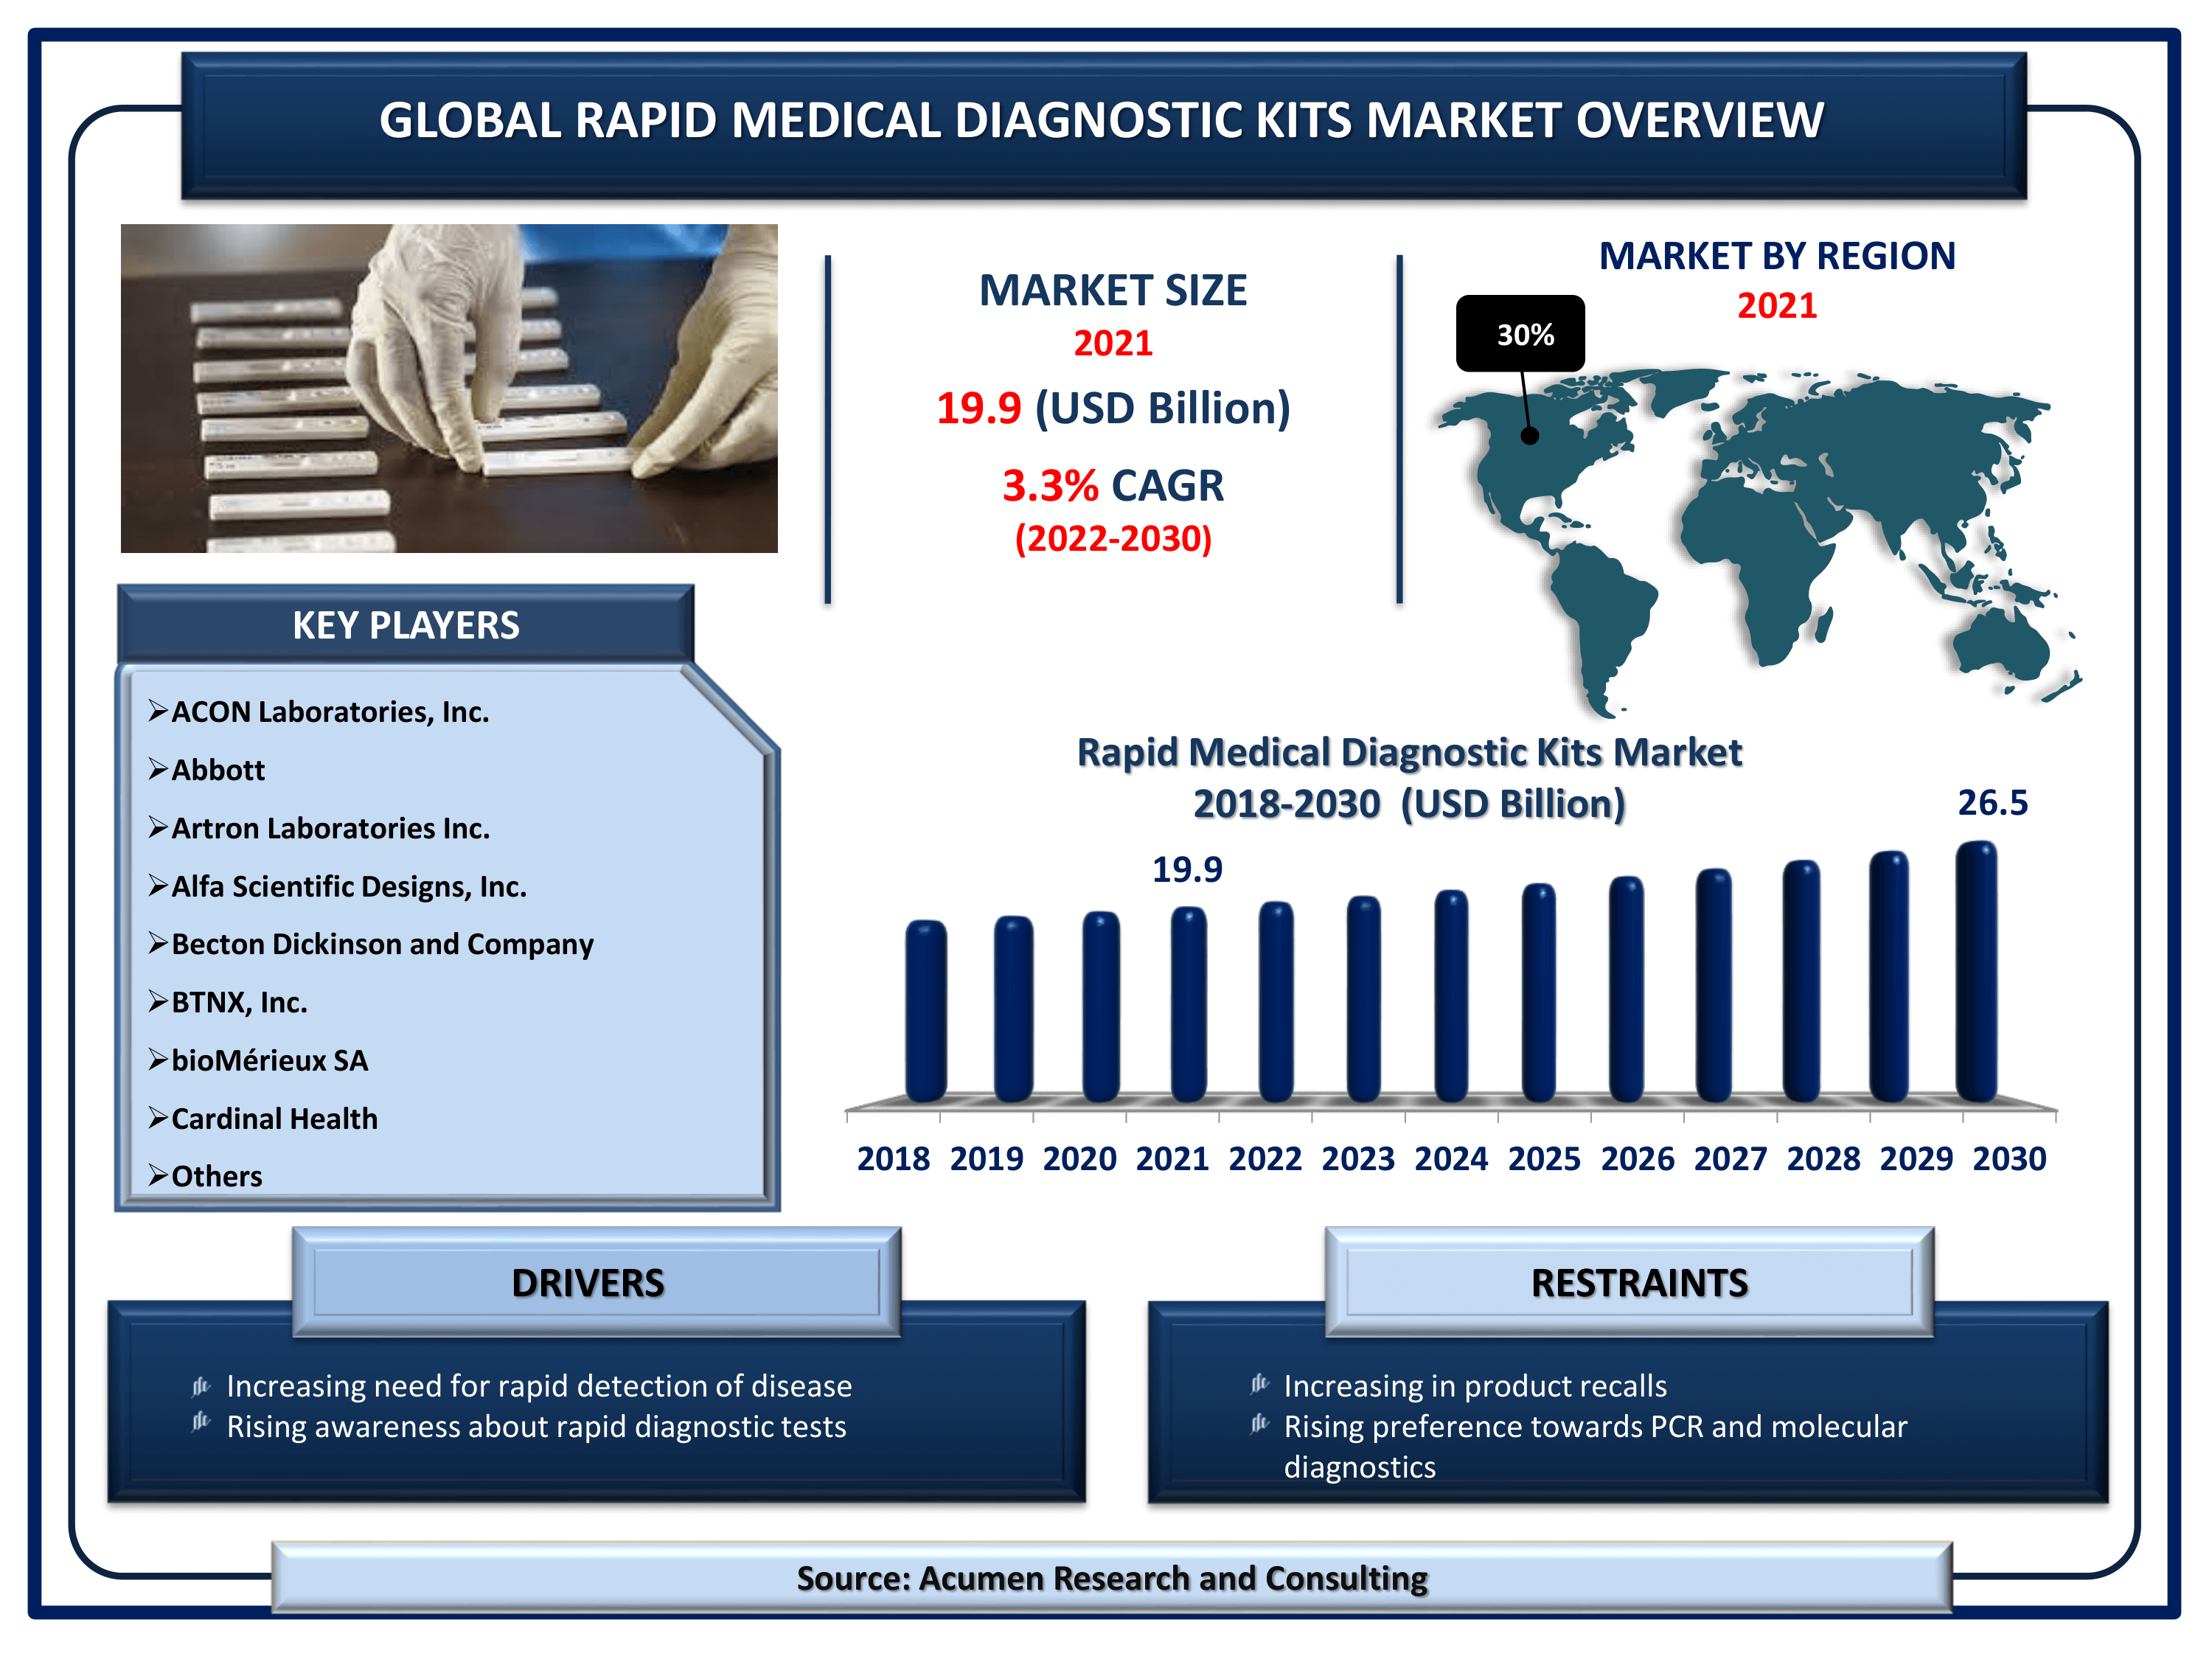 Global rapid medical diagnostic kits market revenue is estimated to reach USD 26.5 Billion by 2030 with a CAGR of 3.3% from 2022 to 2030